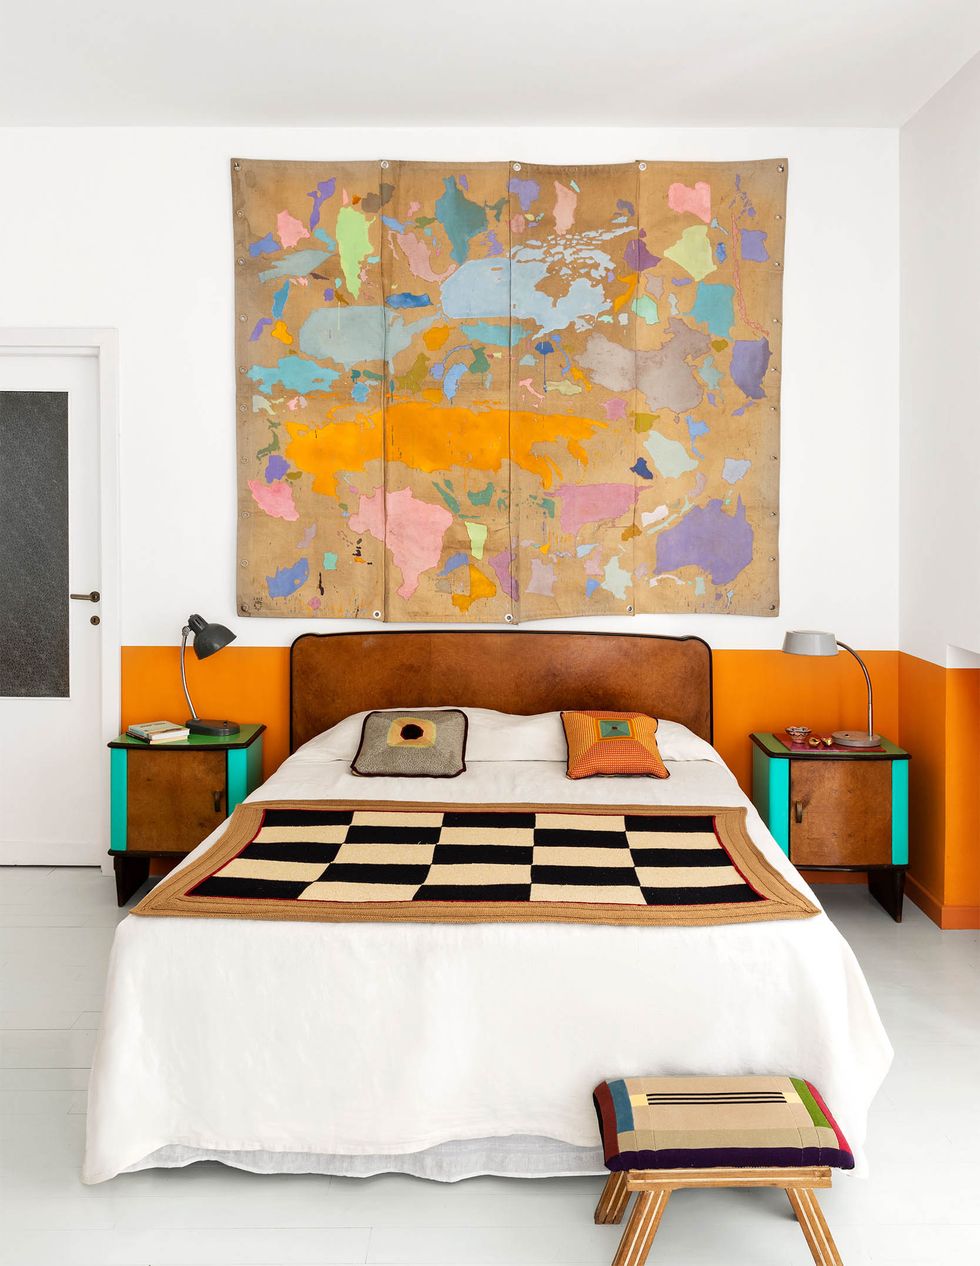 a white walled bedroom with bottom third painted orange, wood headboard and nightstands with aqua sides, gooseneck lamps, white bedcover with checkerboard throw, footstool, artwork in pastels